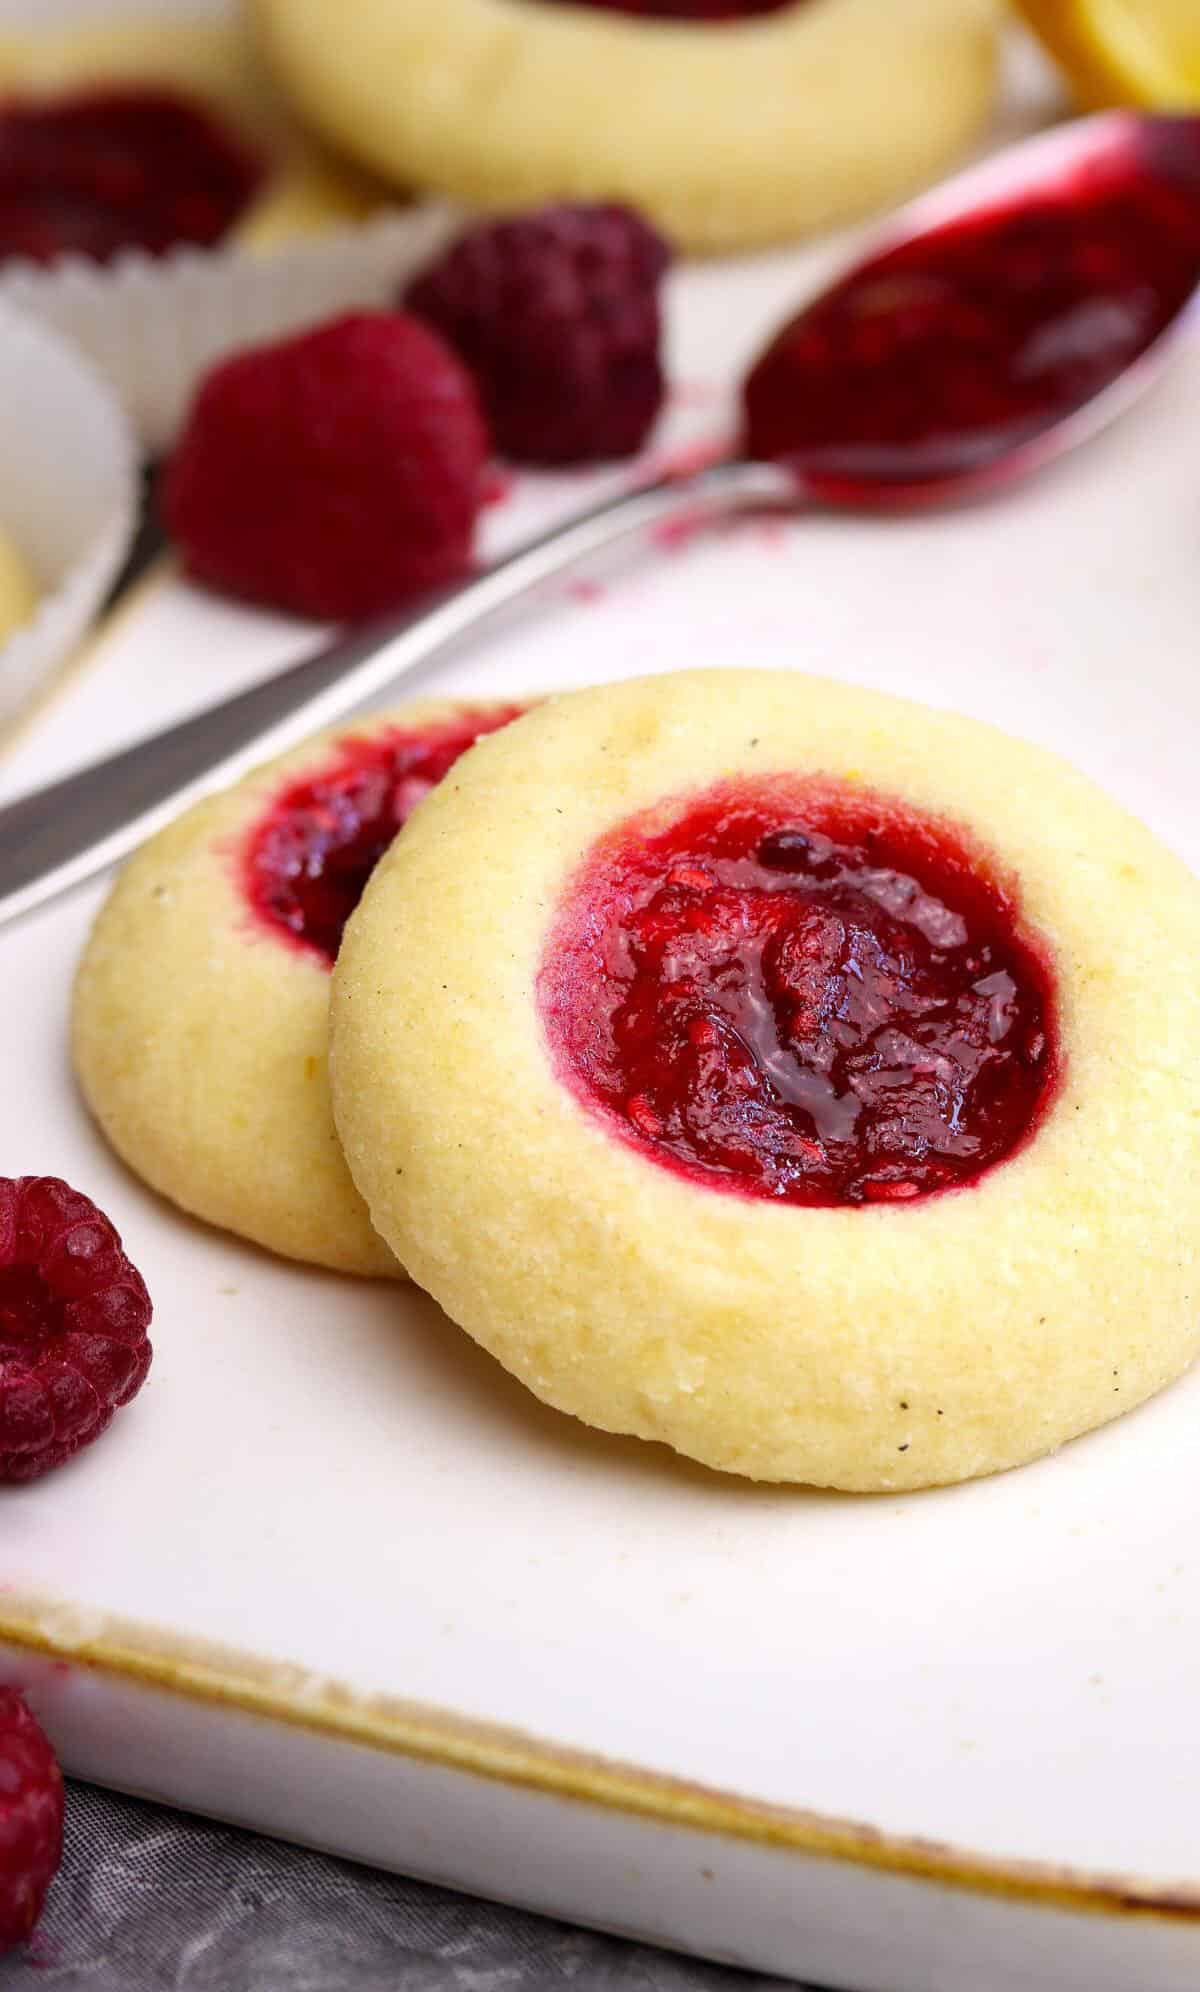  Enjoy these golden, jam-filled bites right out of the oven!